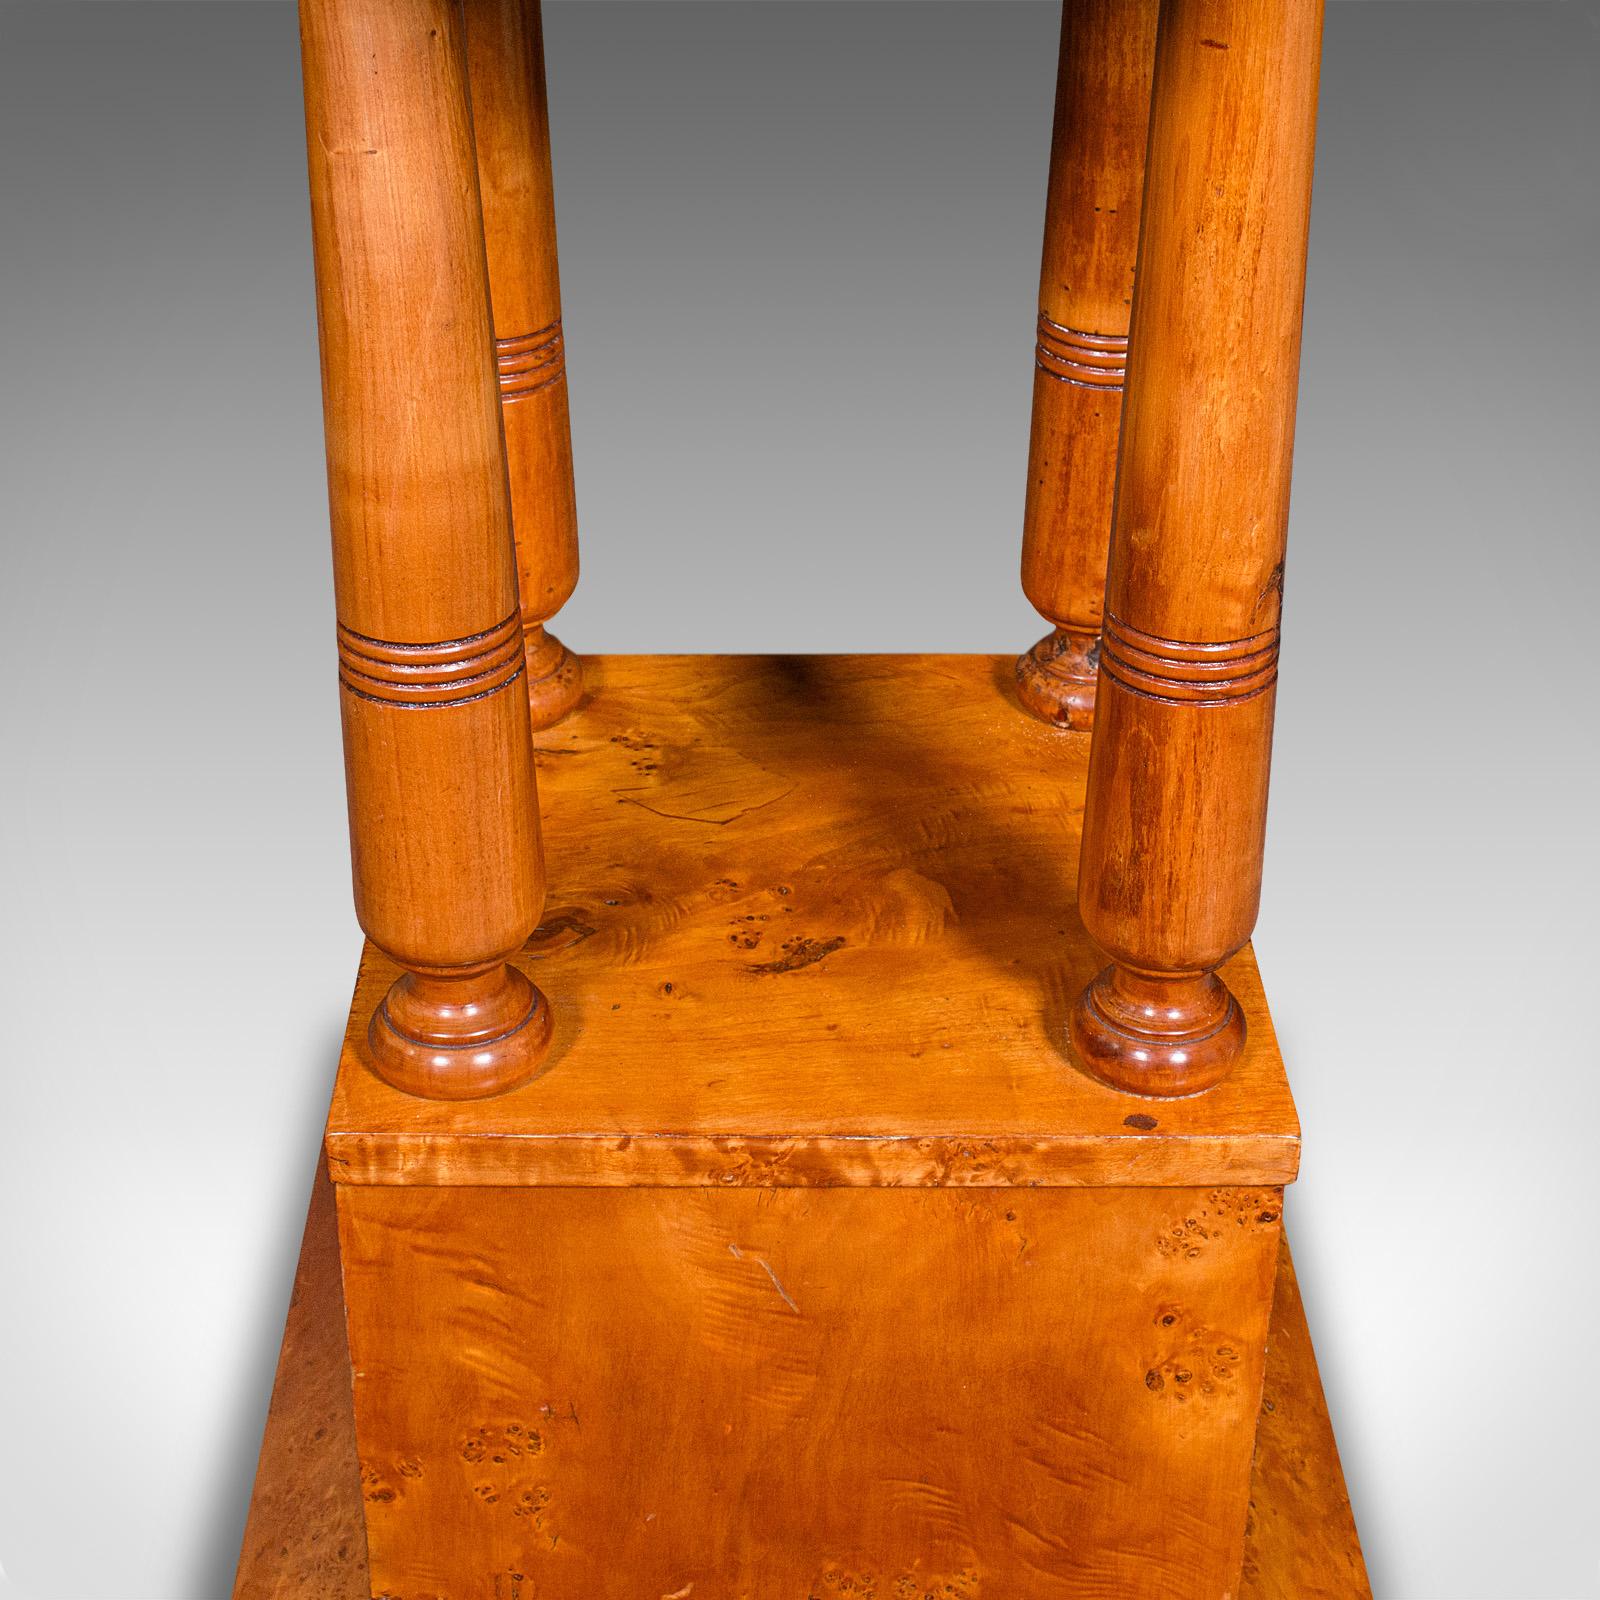 Vintage Podium Hall Table, French, Birds Eye Maple, Lamp, Side, Art Deco, C.1930 For Sale 5